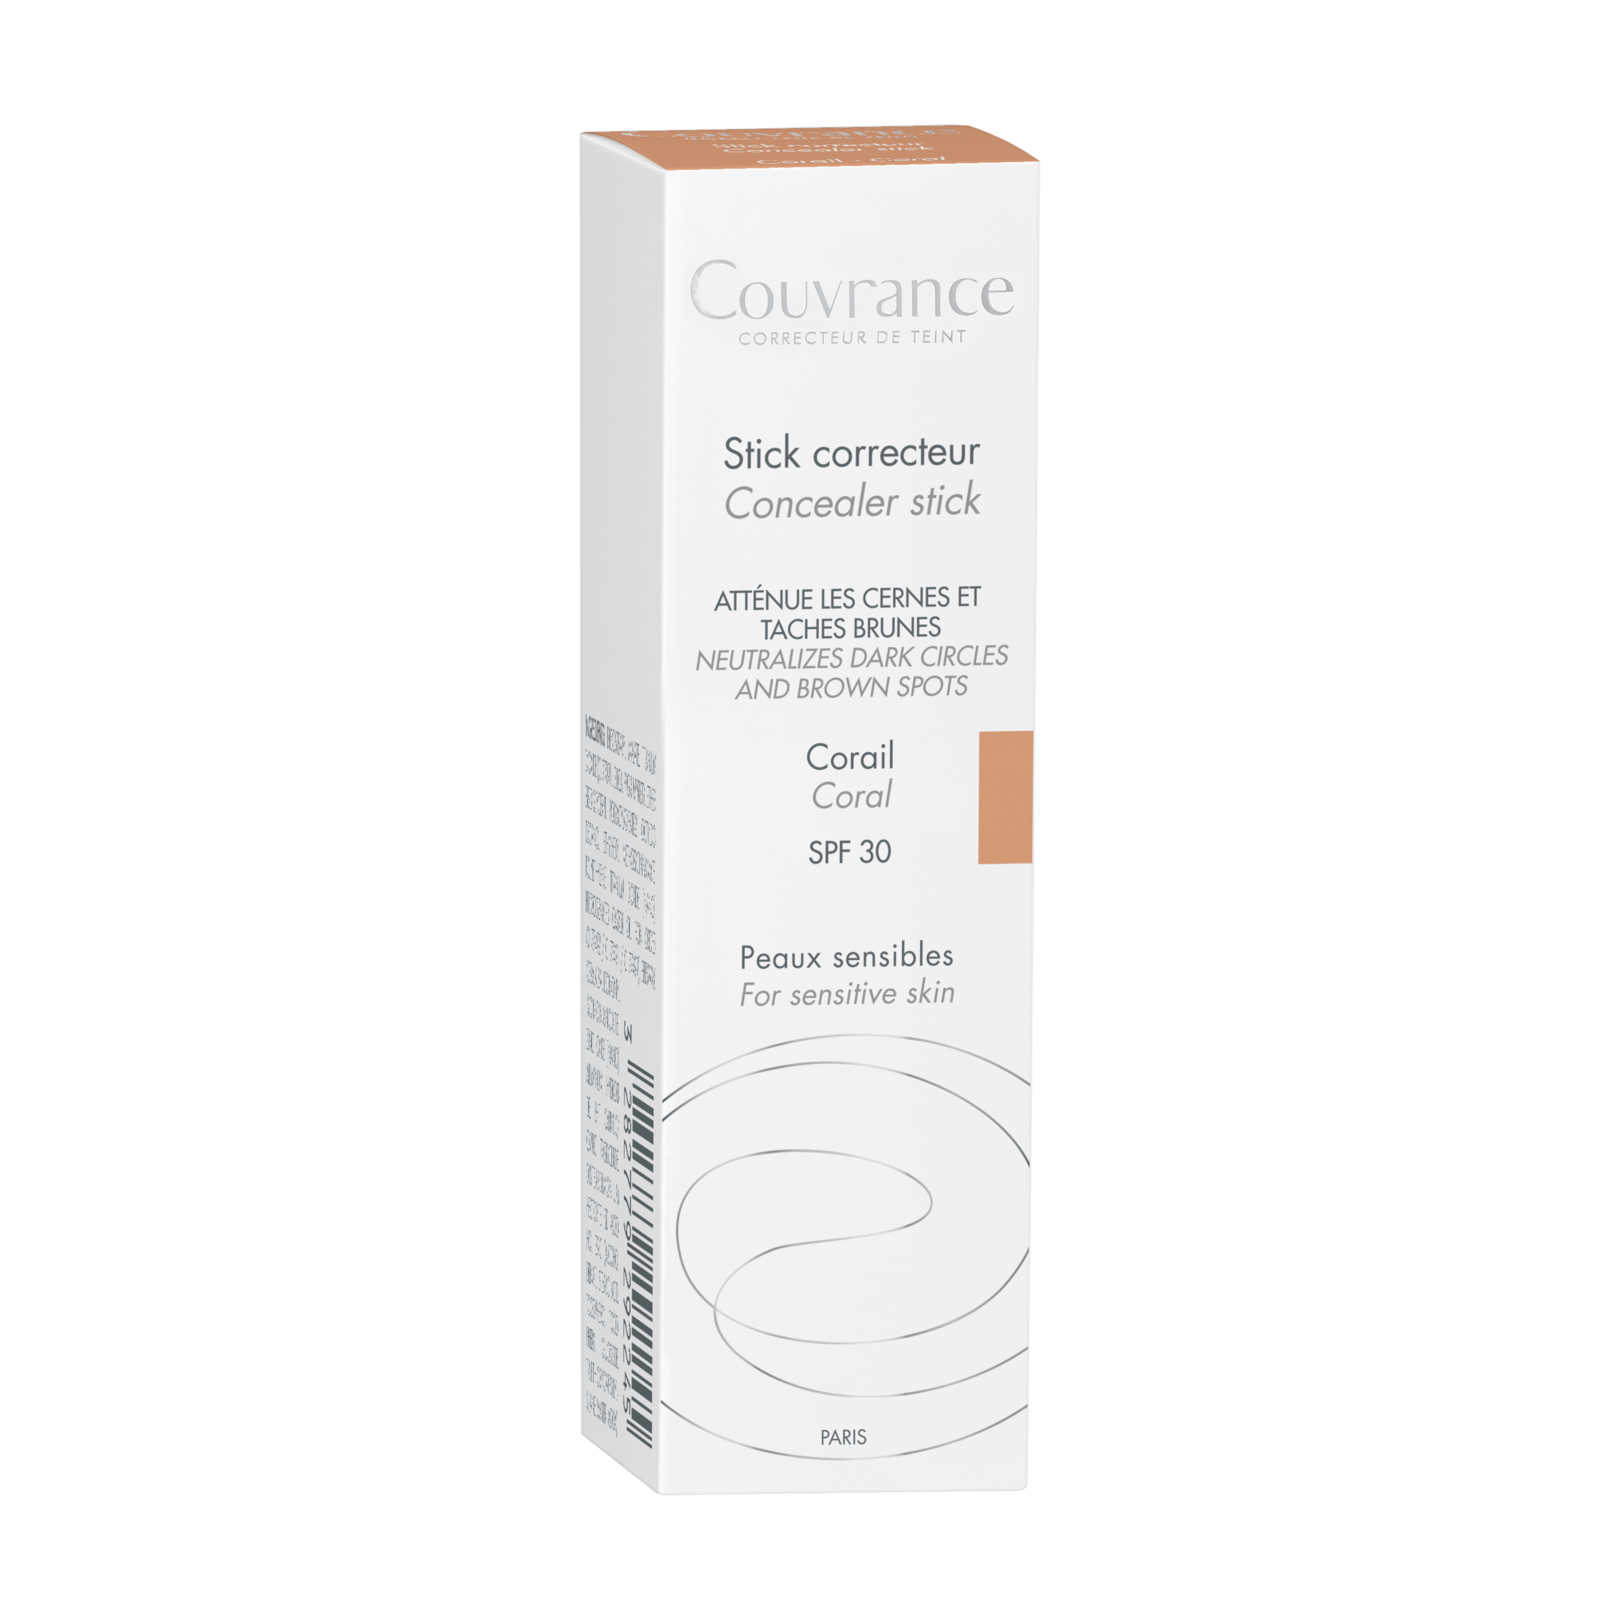 Couvrance Stick corrector Coral